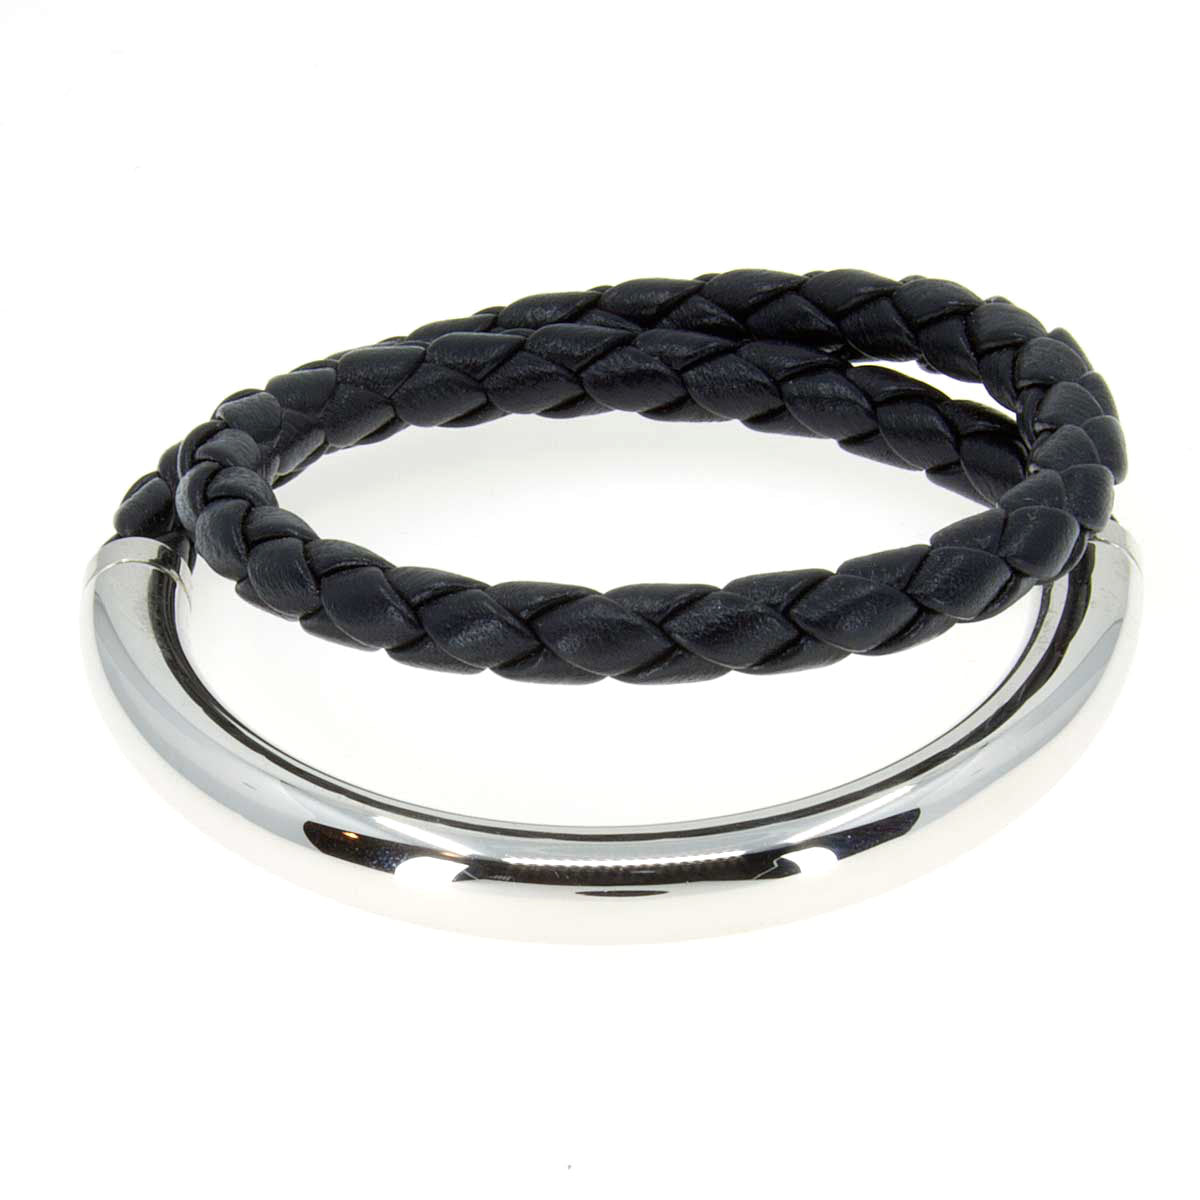 Men's Black Leather and Steel Braided Bracelet - CladdaghRings.com